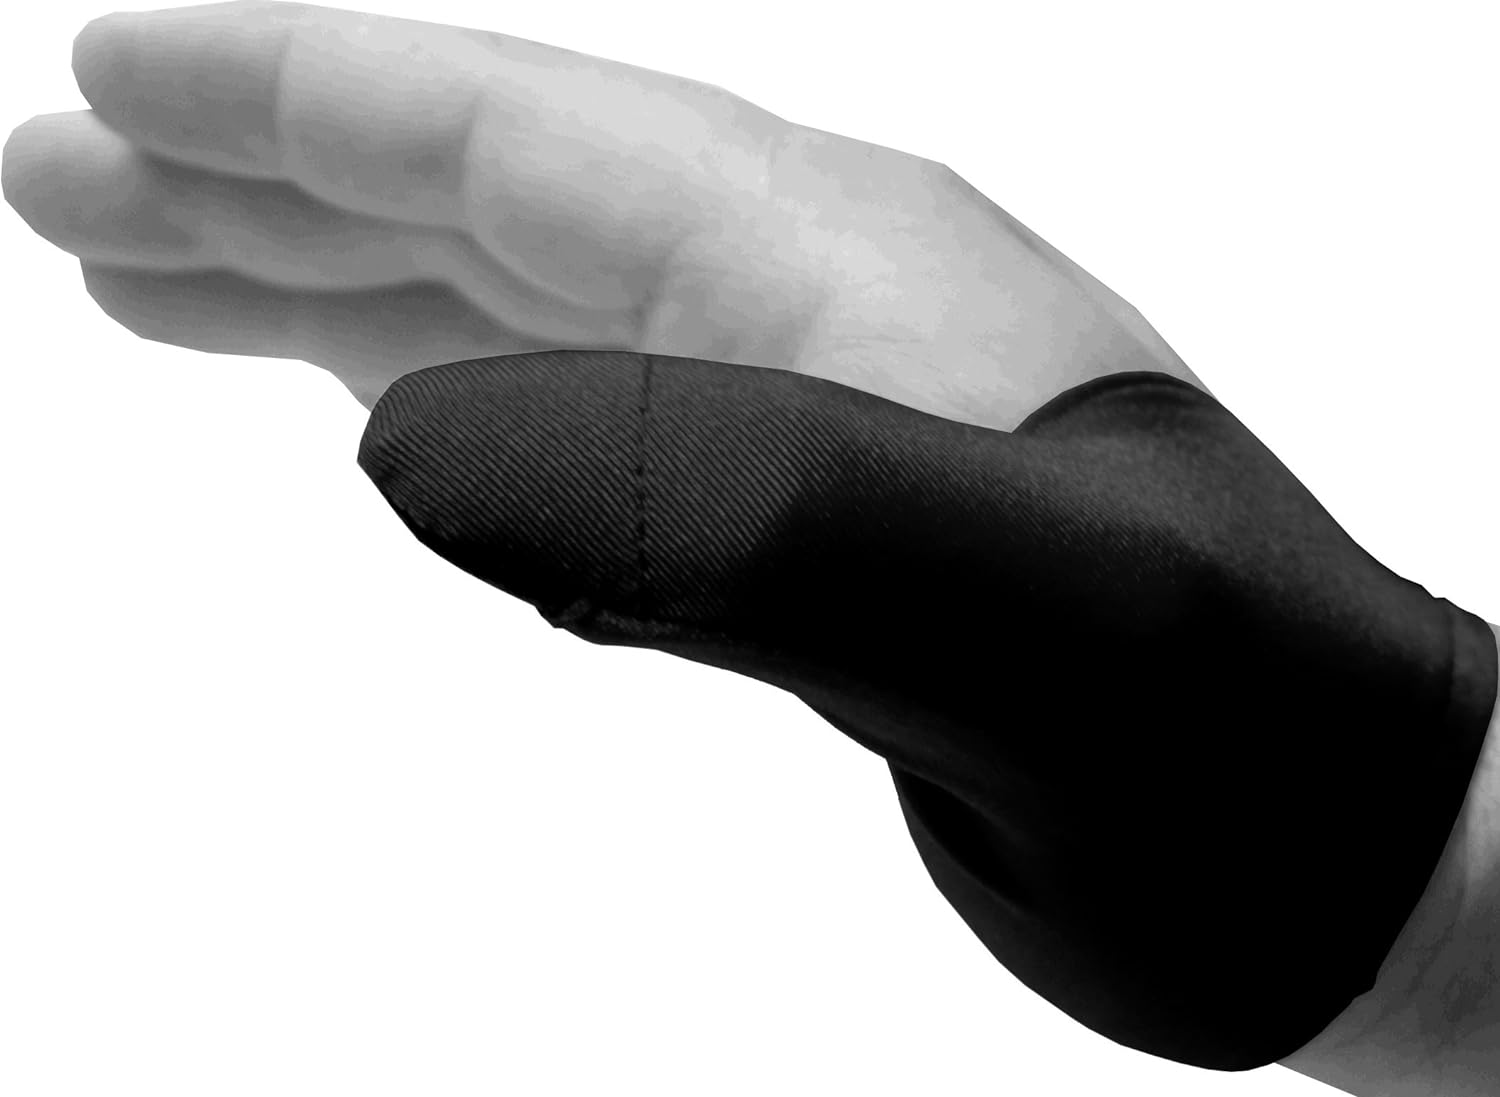 LoveNSports - Bowling Ball Thumb Socks Insert Around Wrist - Tape Replacement with Grip Support- Right Glove Saver